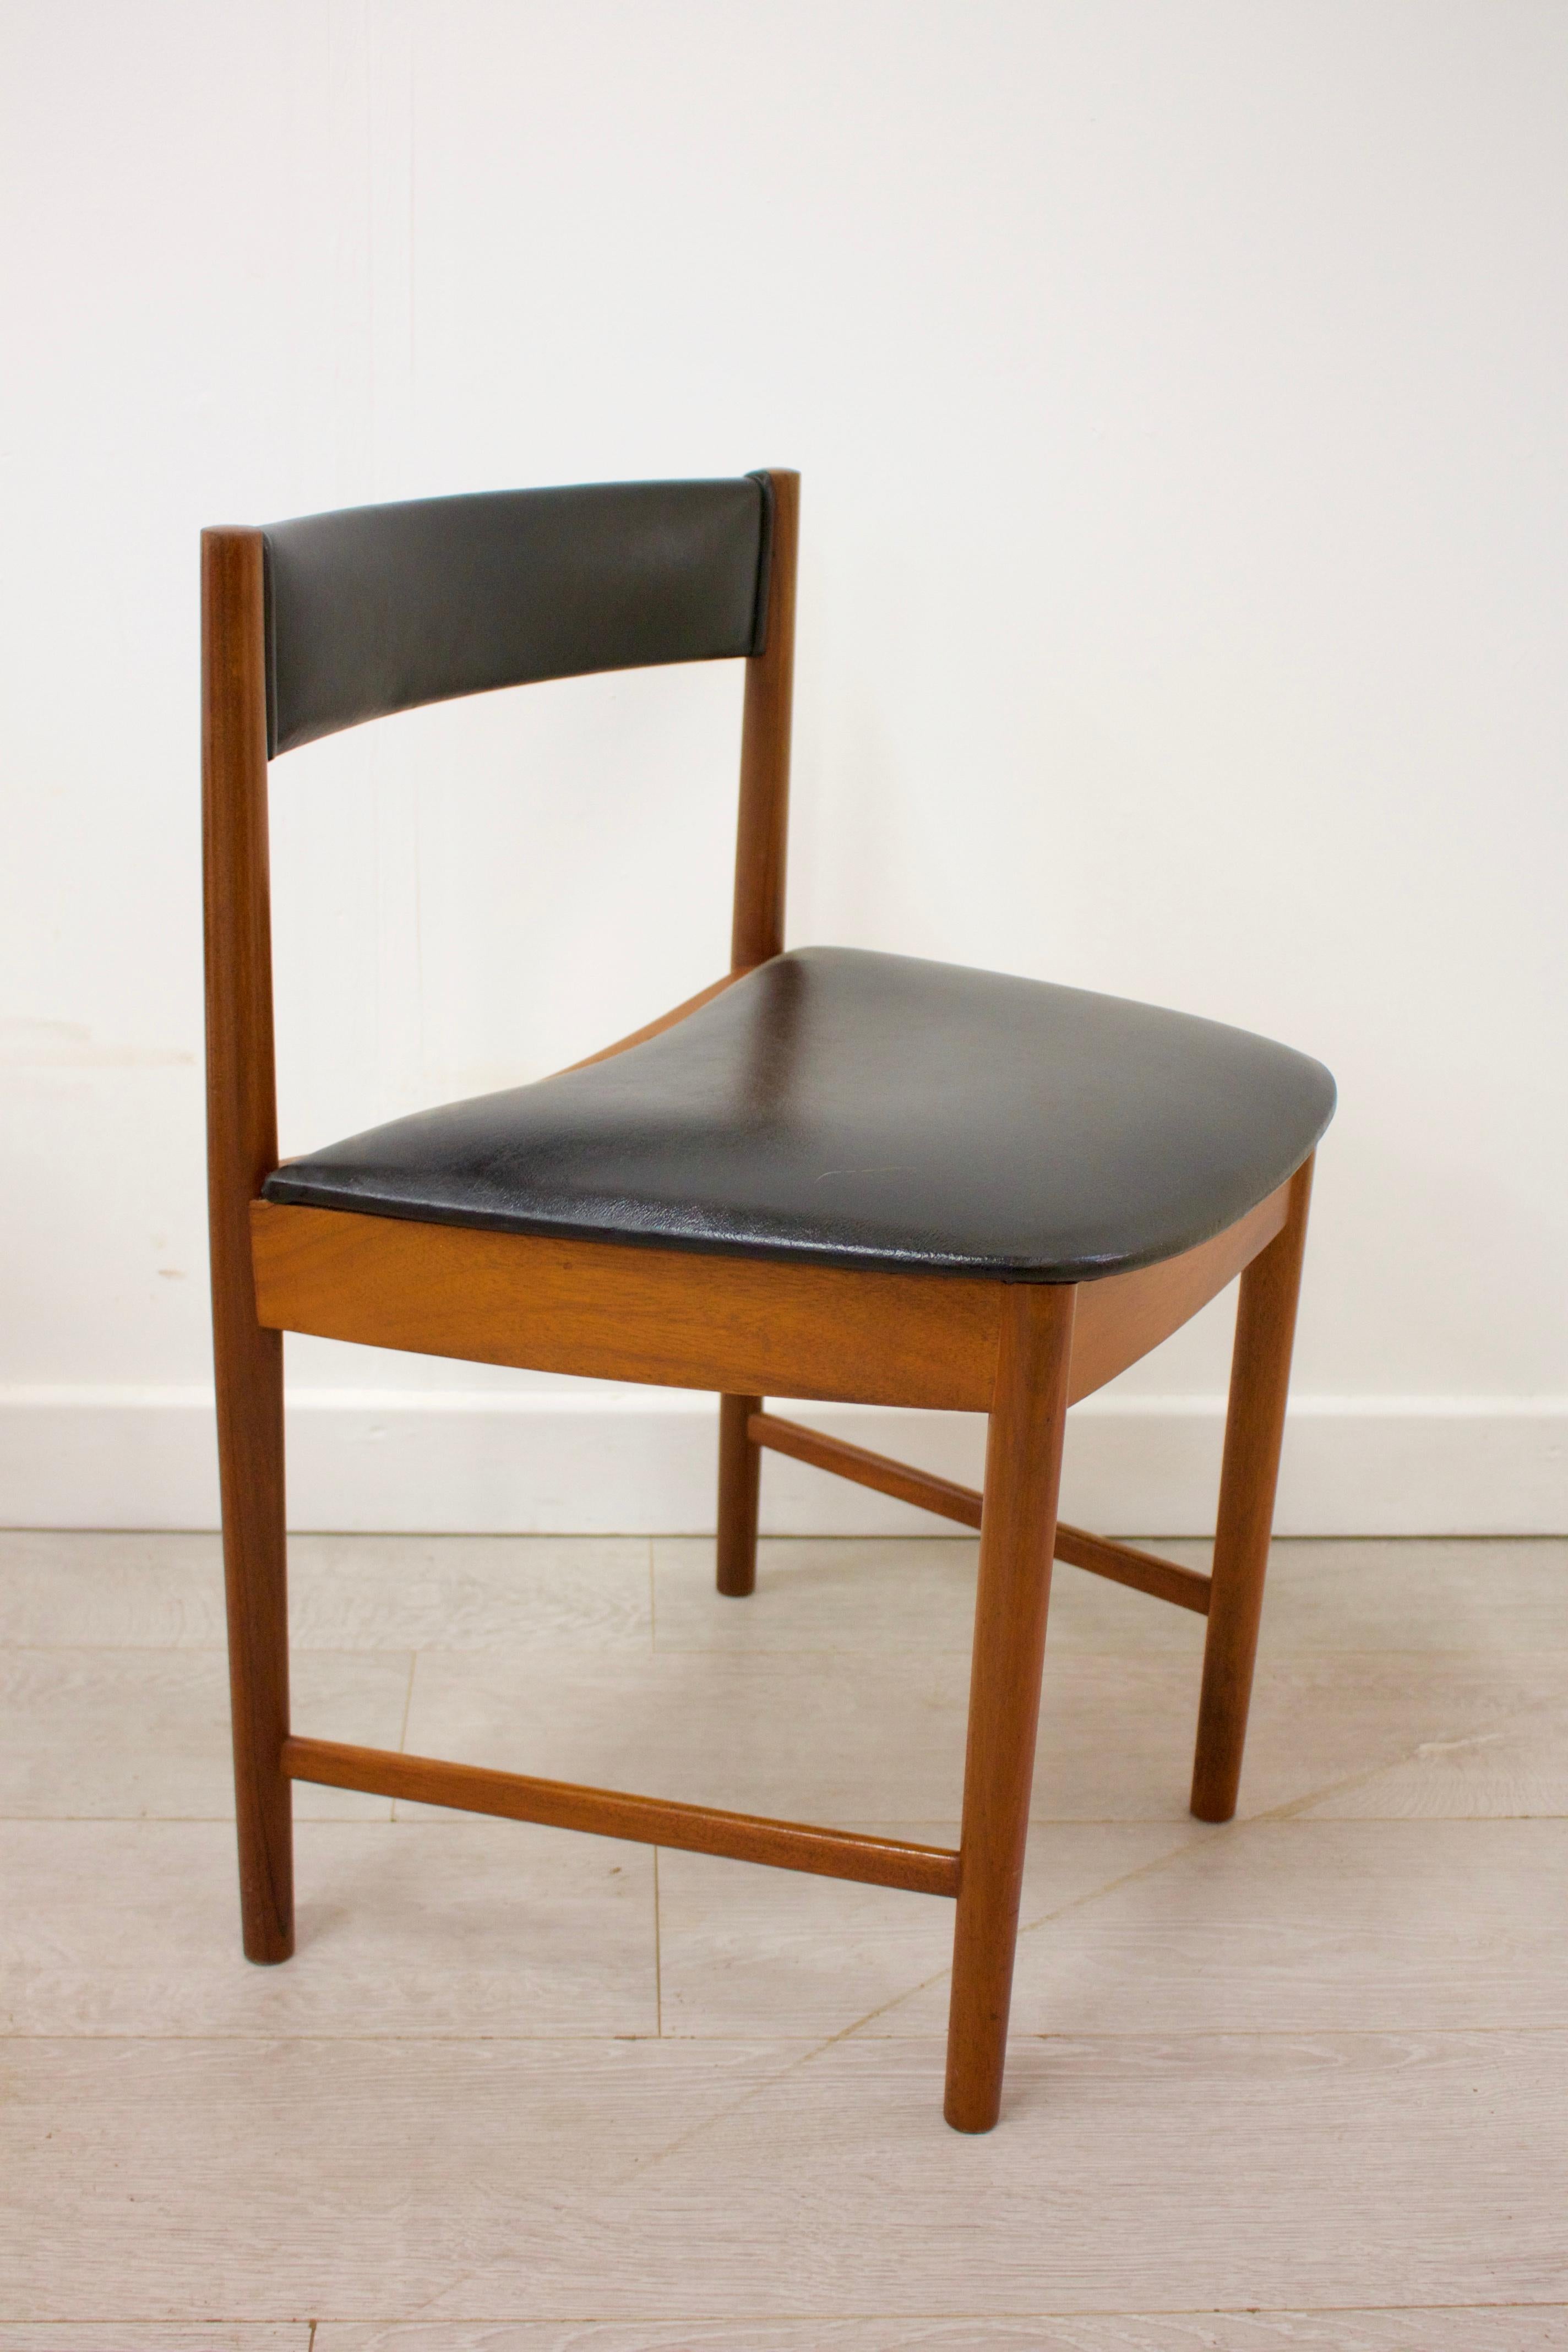 Mid-20th Century Midcentury Teak Extendable Dining Table with 4 Chairs from McIntosh, 1960s